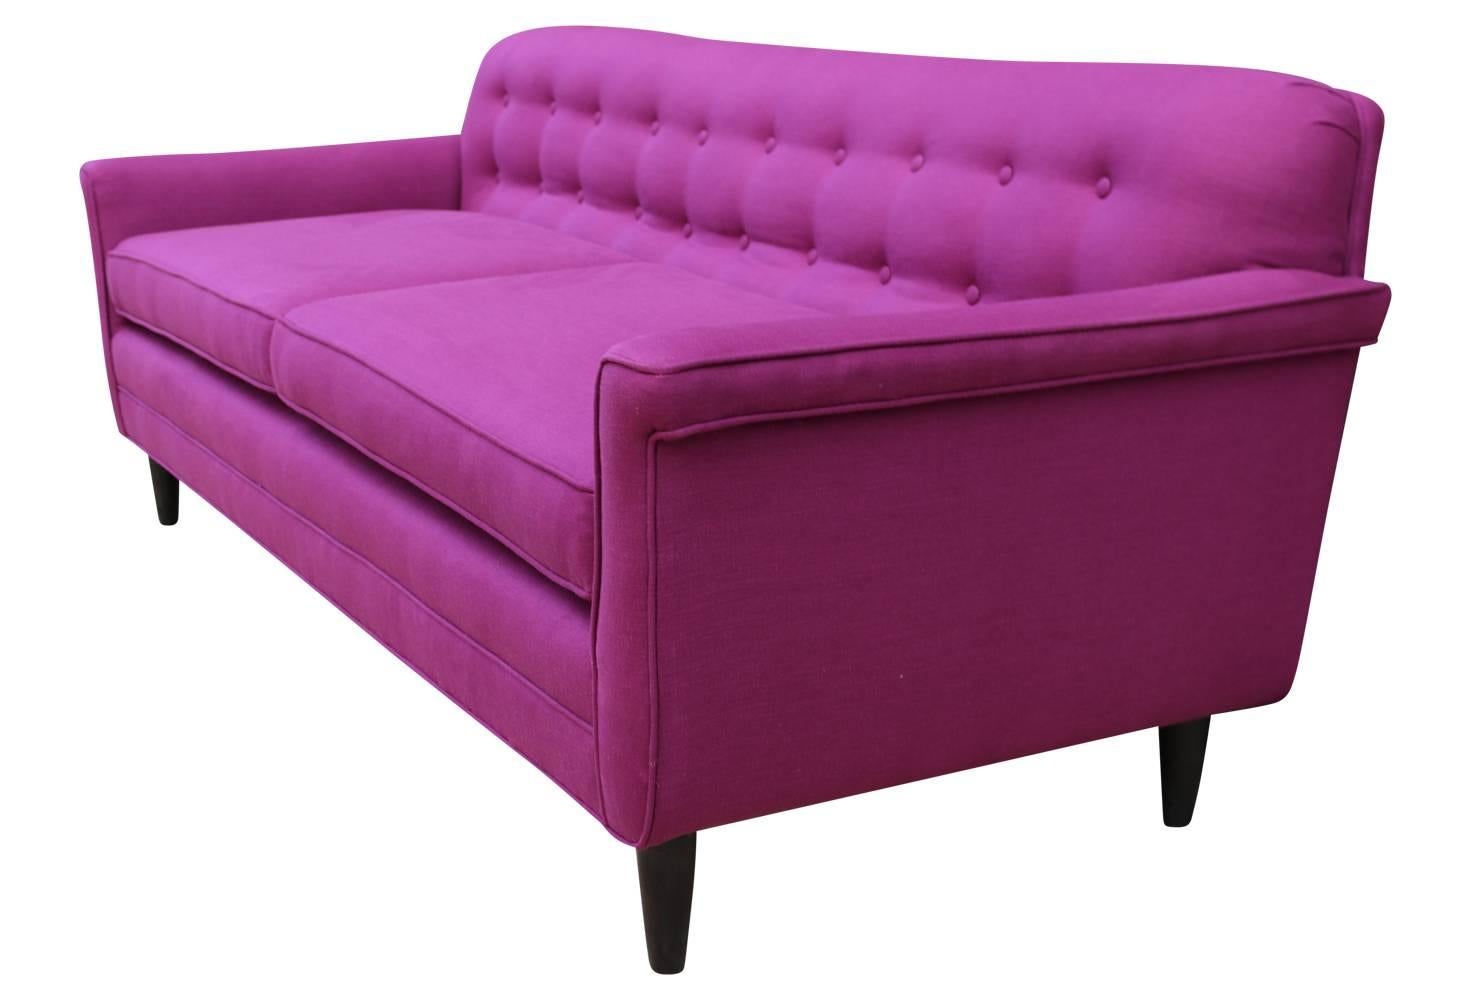 This is a rare example of Wormey's work, a variation on his "Career Group" line. Sofa has been lovingly restored with new foam and clothed in a lovely raspberry pink linen. All original details have been maintained.